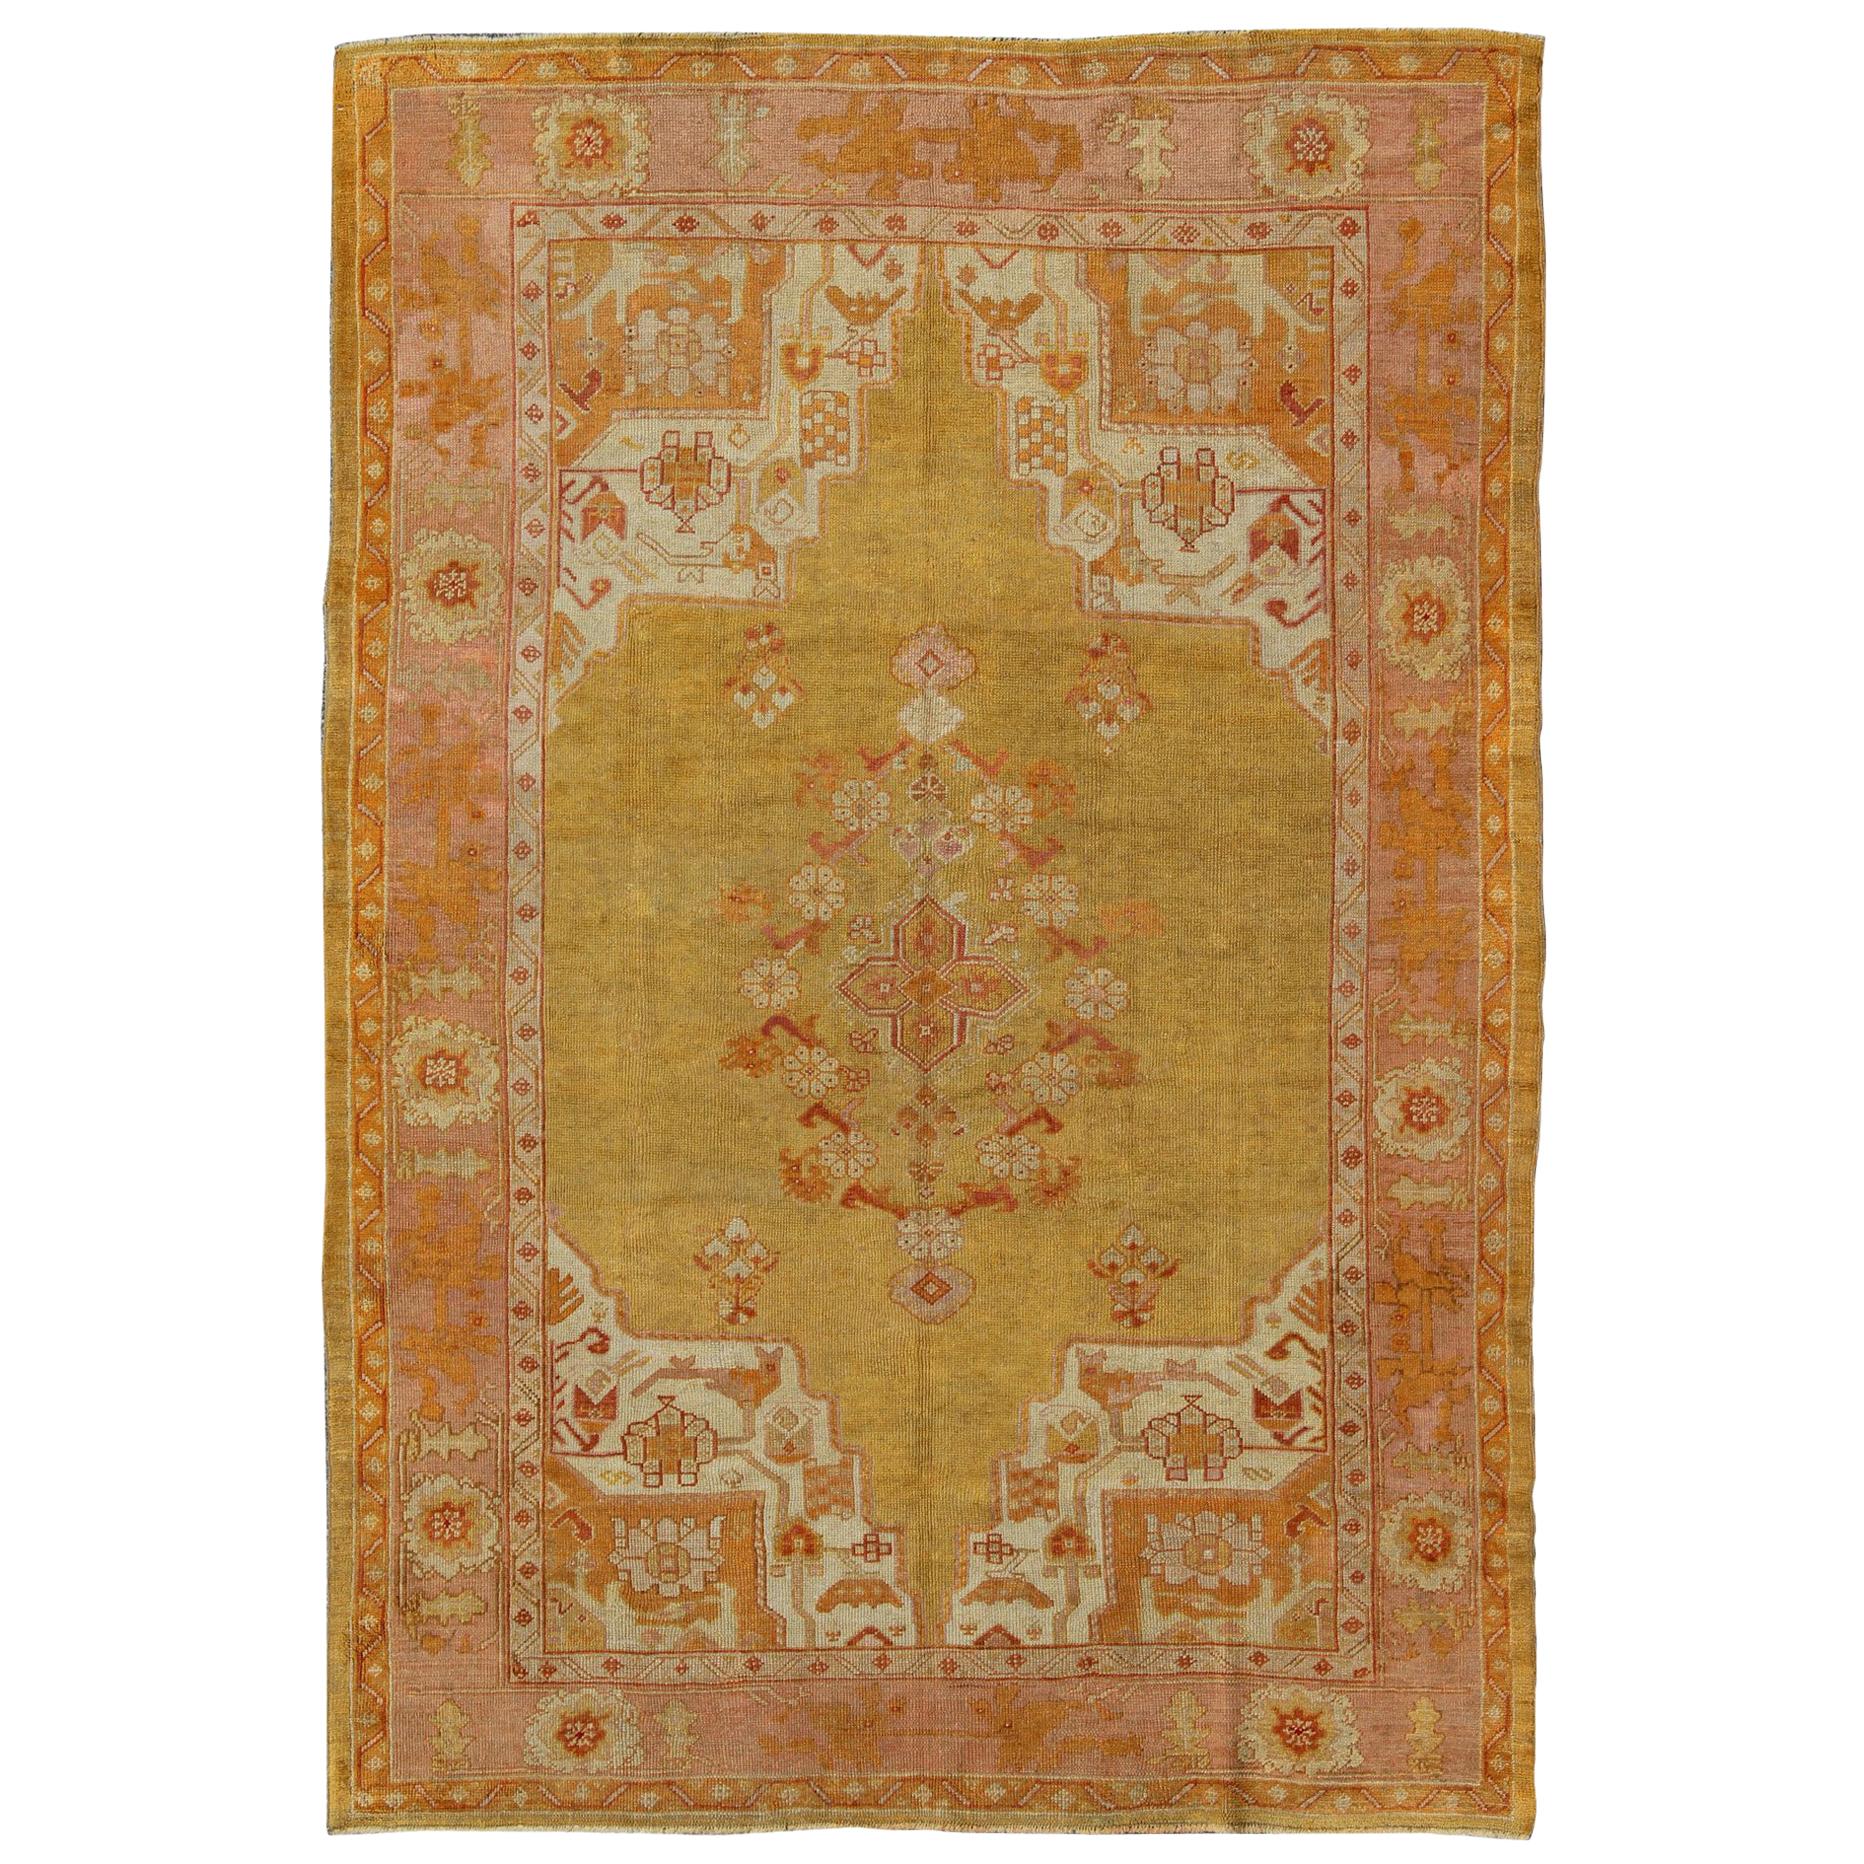 Antique Oushak Rug in Yellow Green Background, Pink Border, Red & Orange Accents